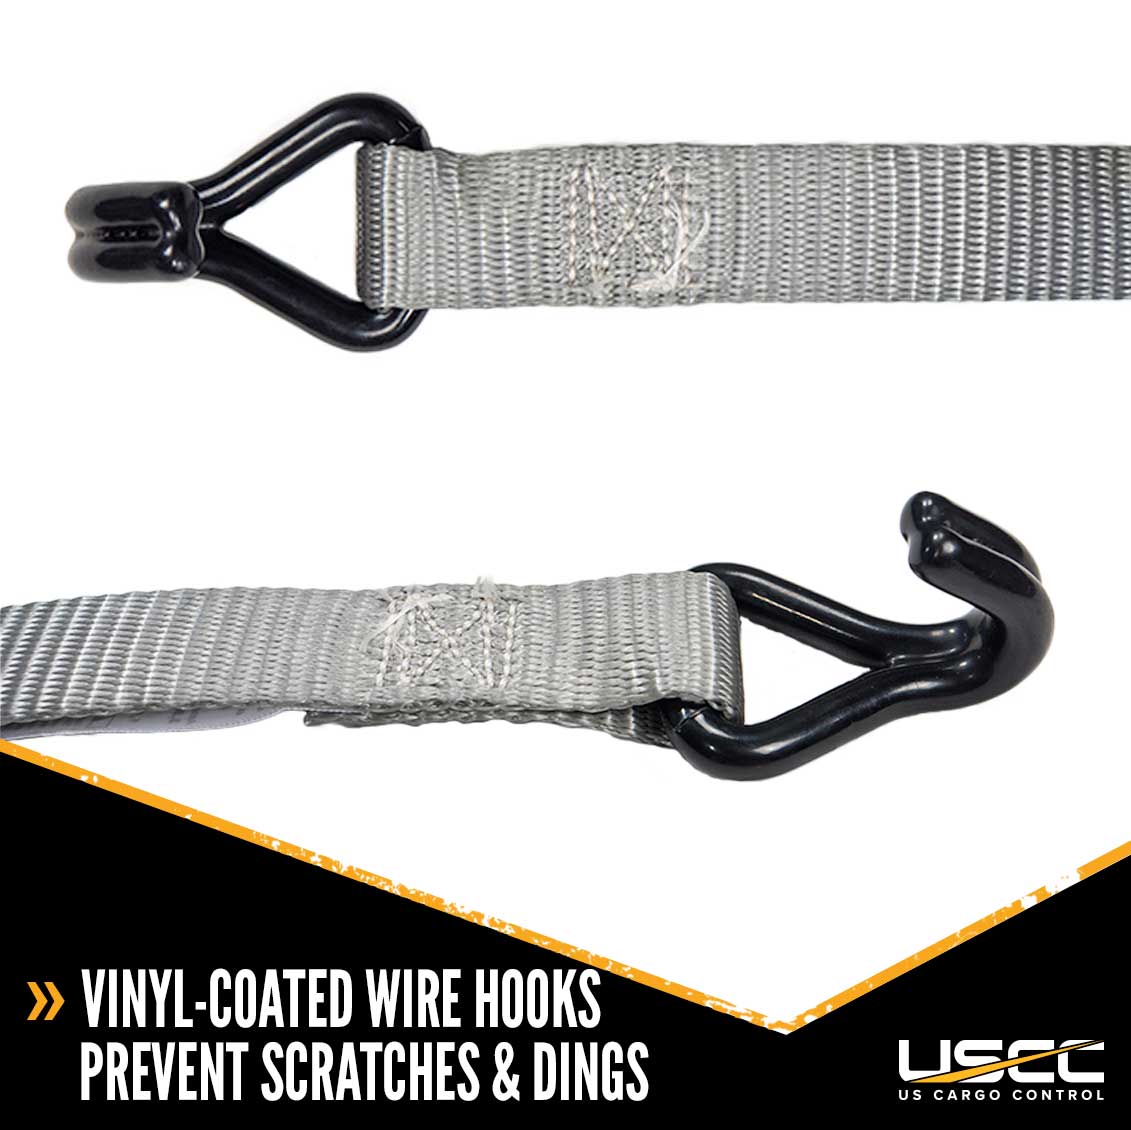 1 x 15' Rubber Coated Ratchet Strap w/ Vinyl Coated Wire Hooks